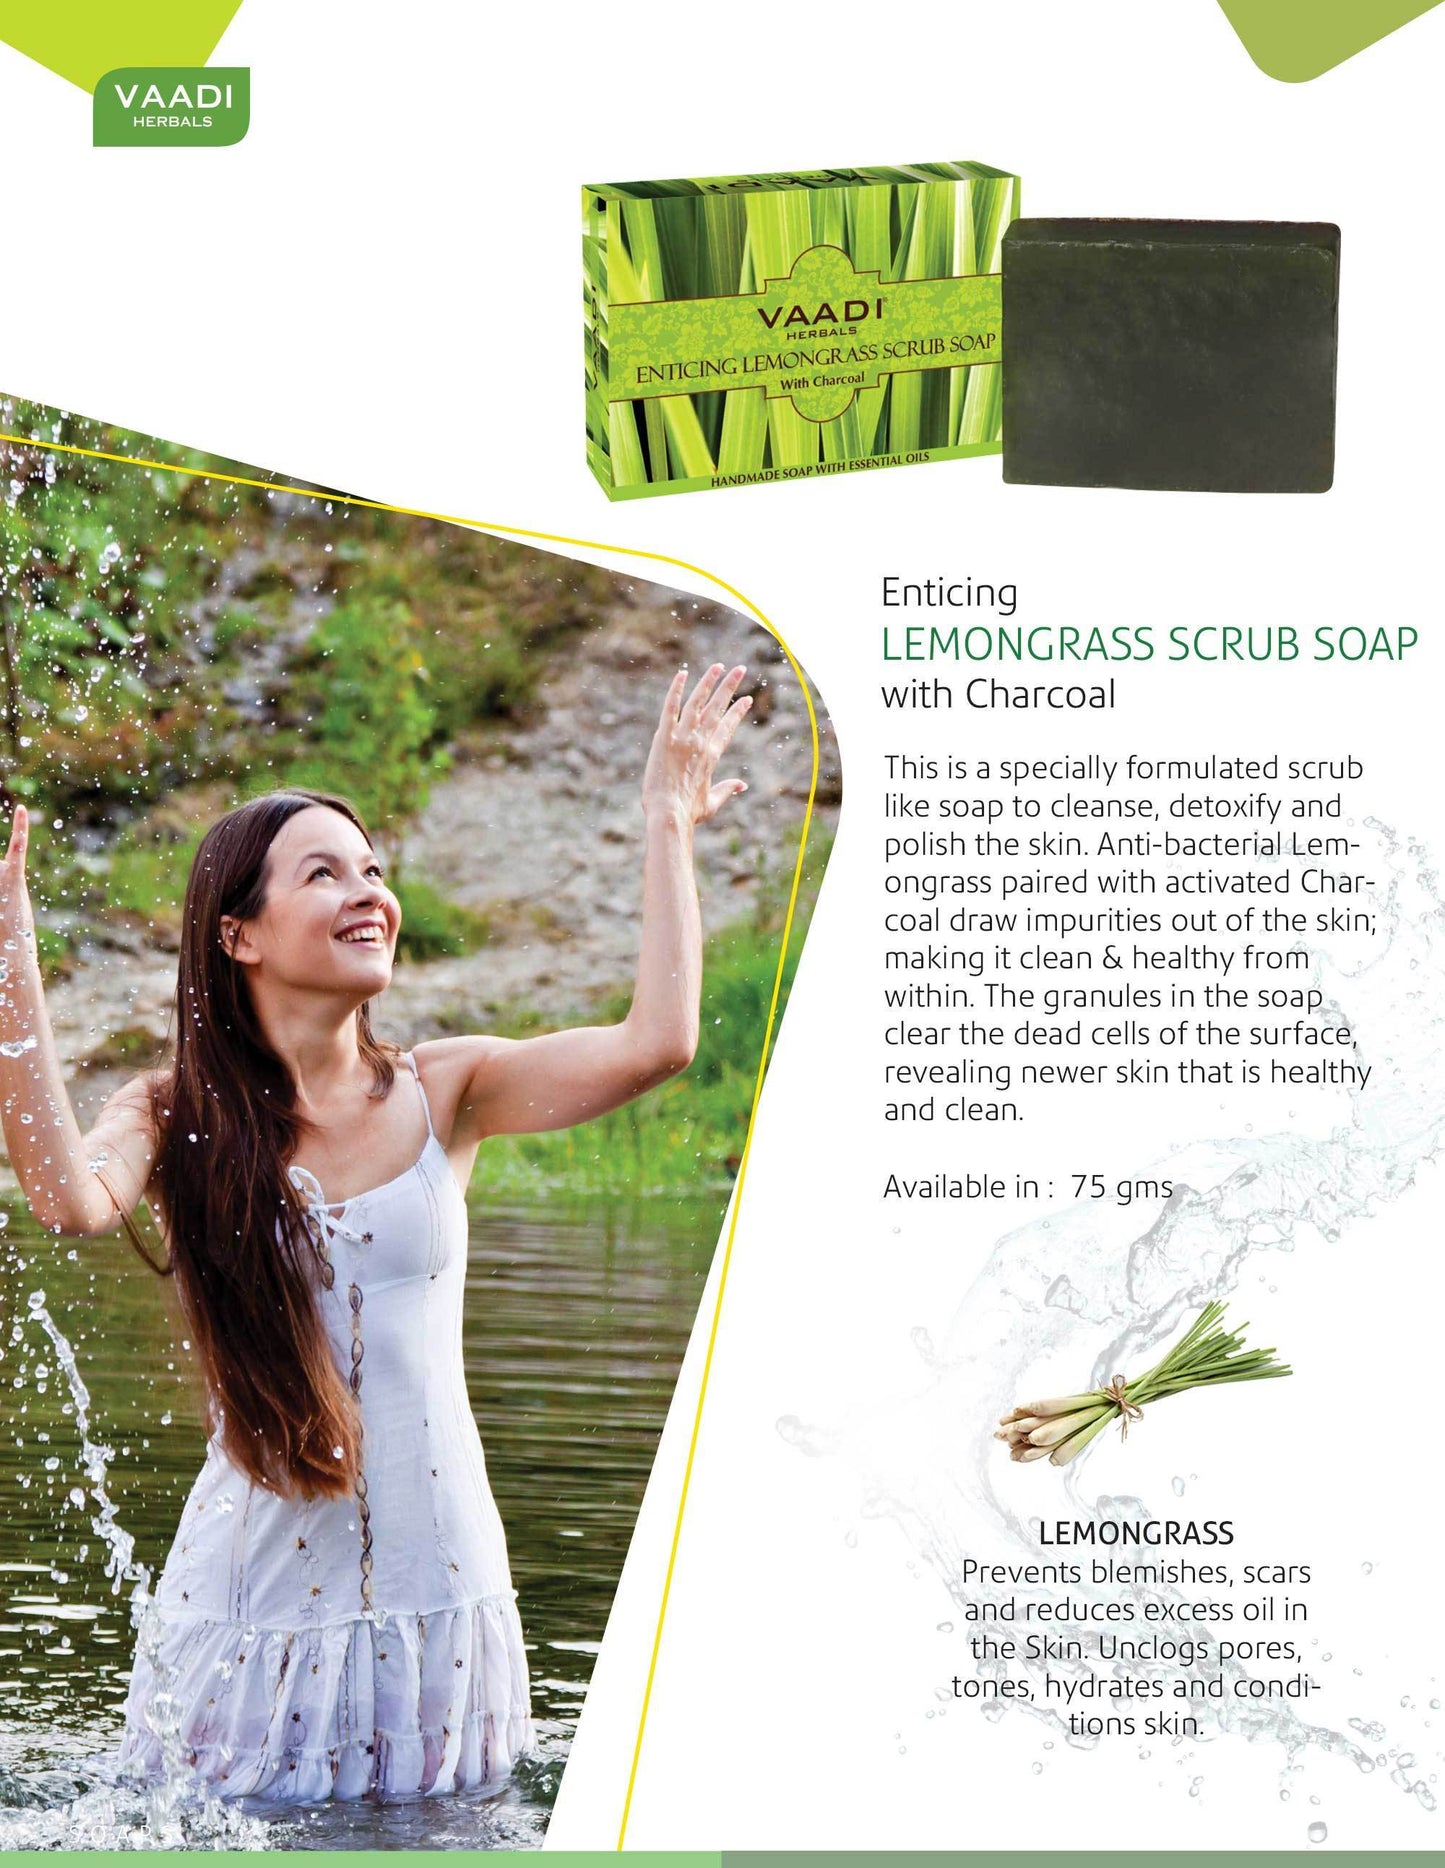 Enticing Organic Lemongrass Soap with Charcoal - Exfoliates & Polishes Skin - Makes Skin Smooth (75 gms / 2.7 oz)